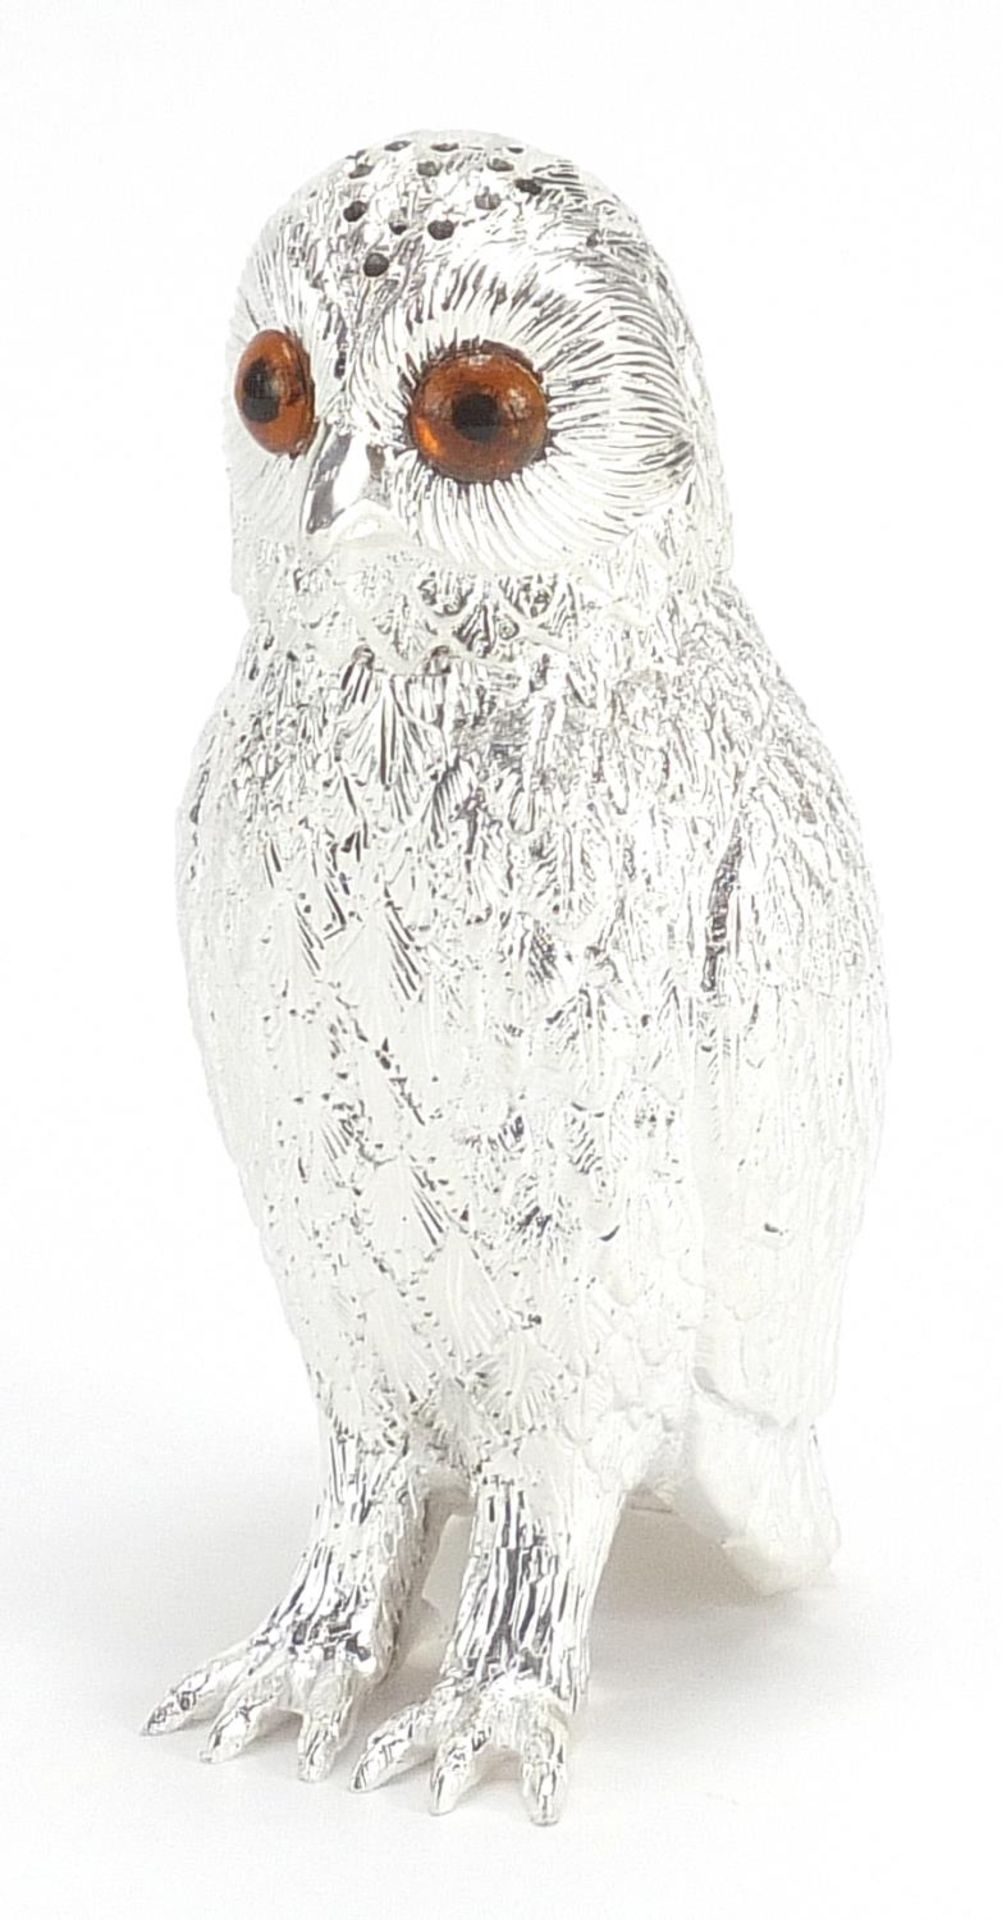 Large novelty silver plated caster in the form of an owl, 15cm high